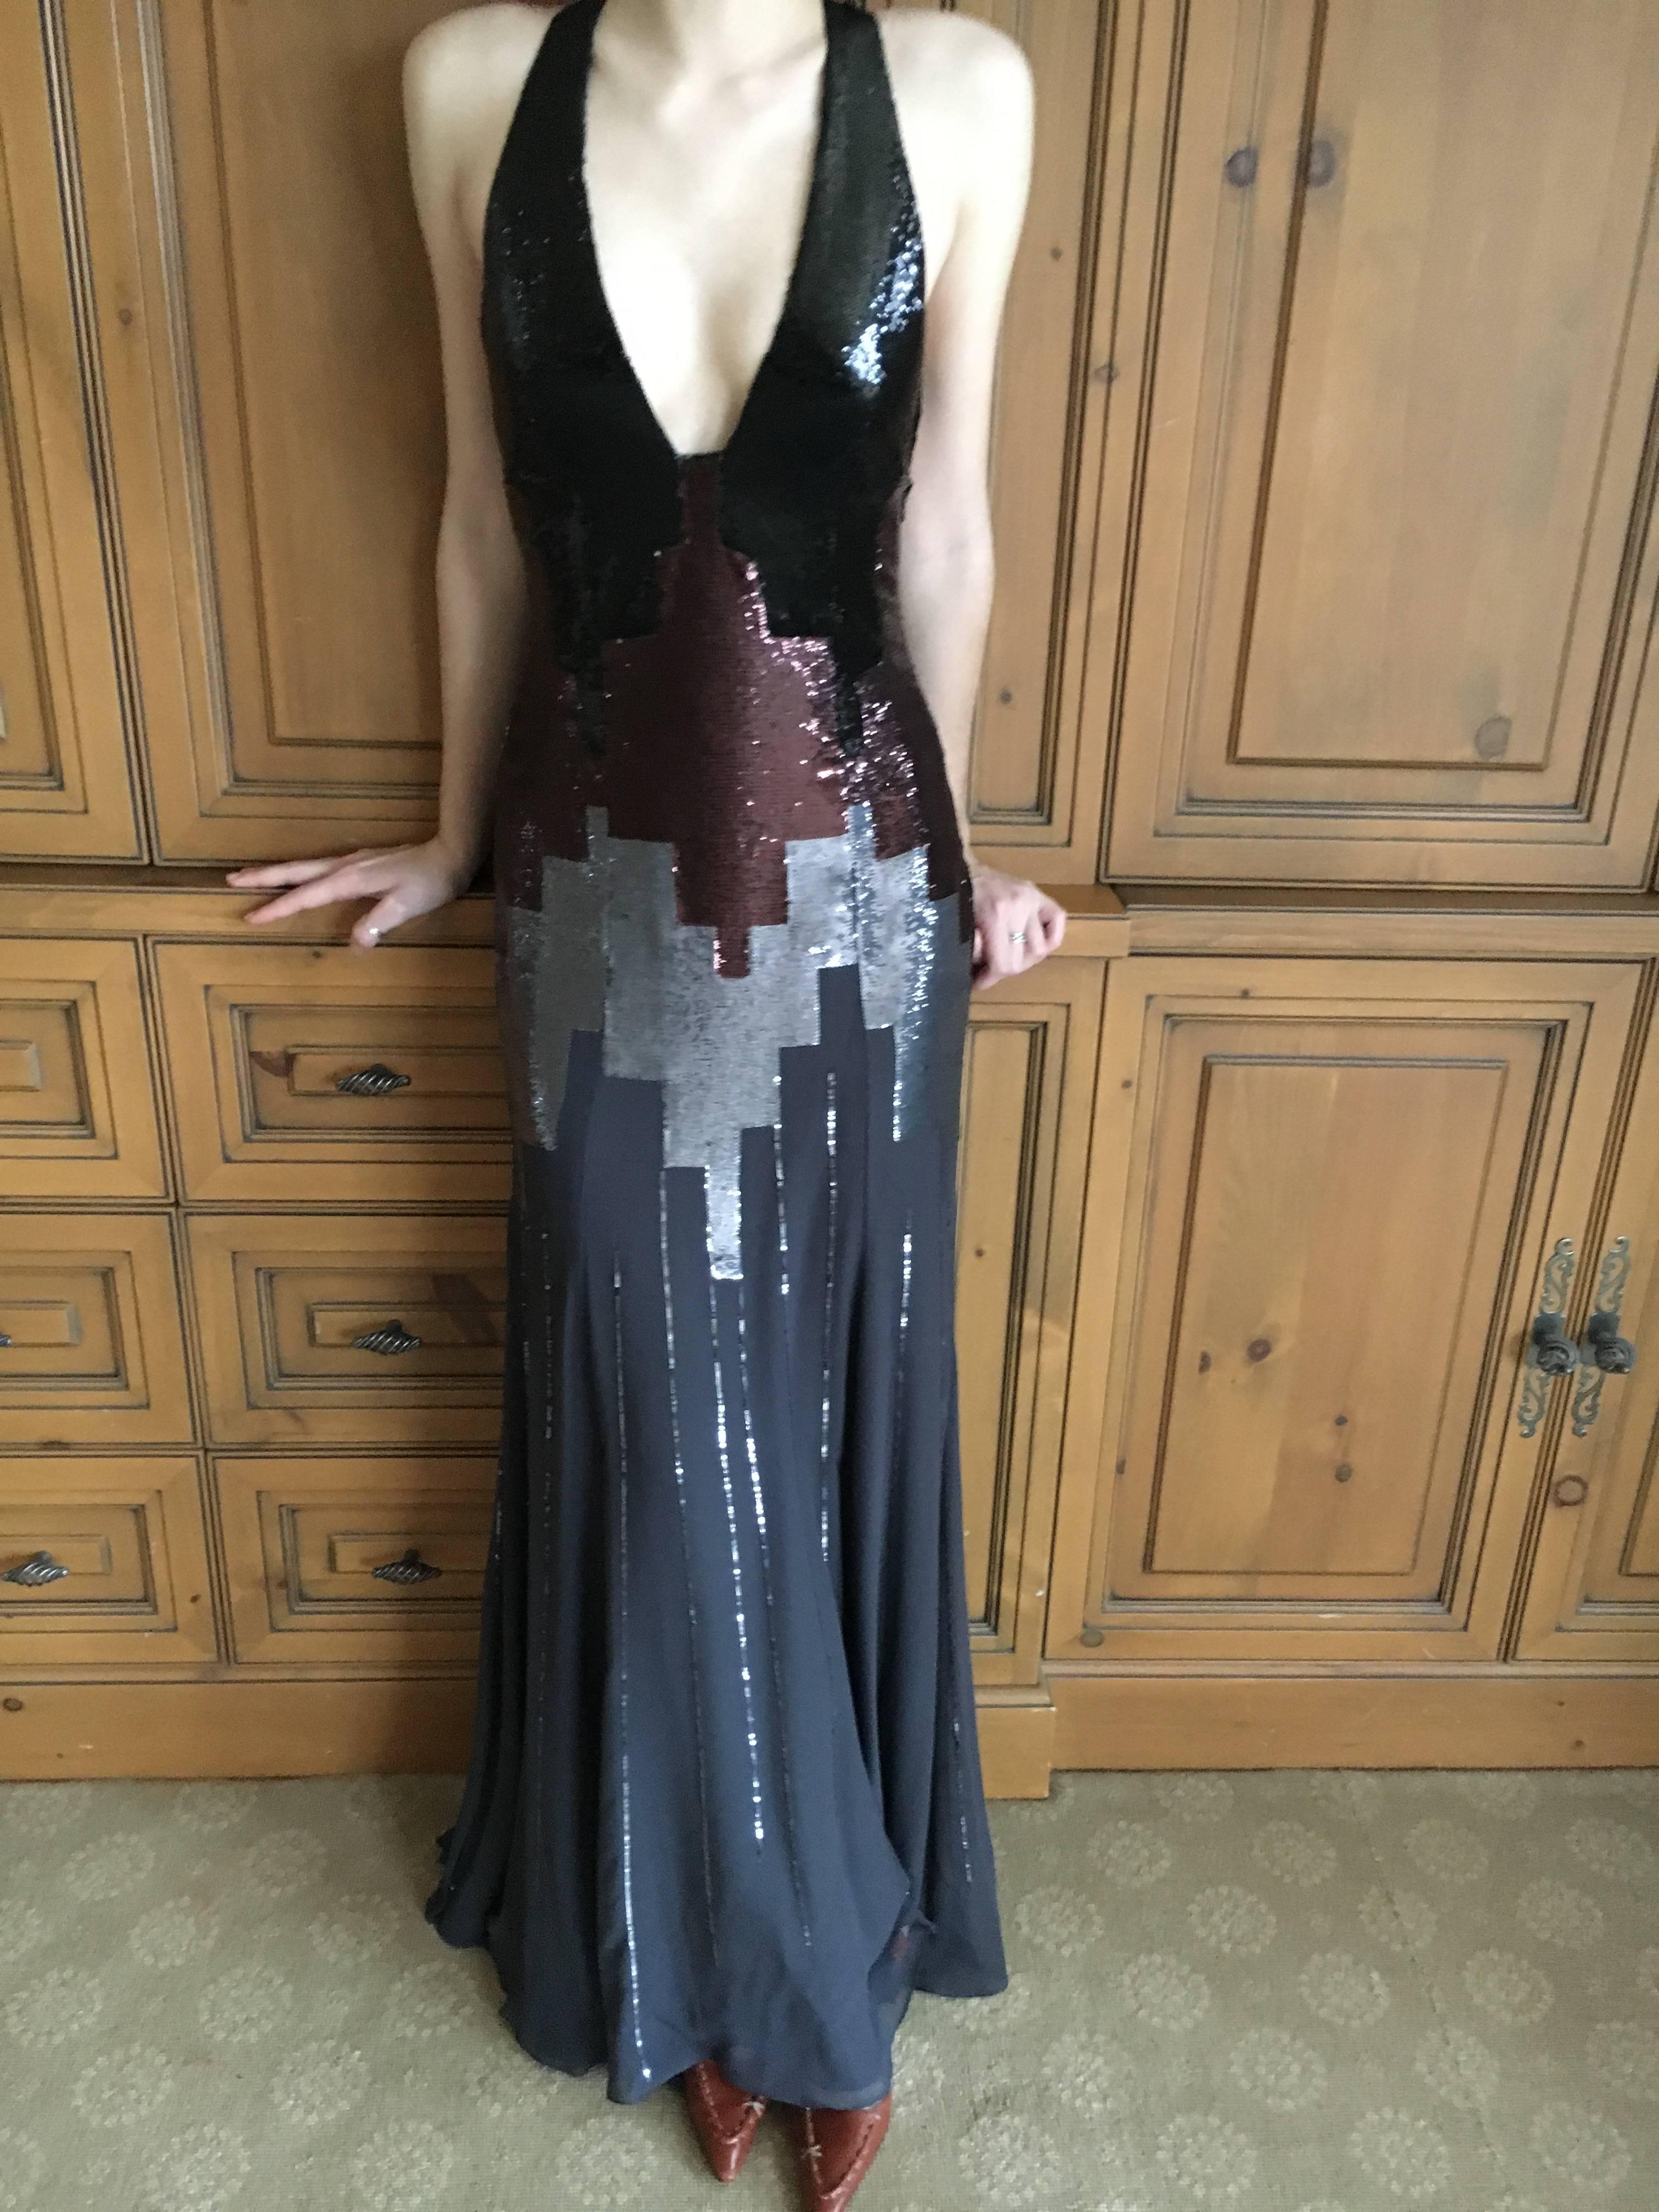 Versace Sequin Evening Dress with Deco Cityscape Design In Excellent Condition For Sale In Cloverdale, CA